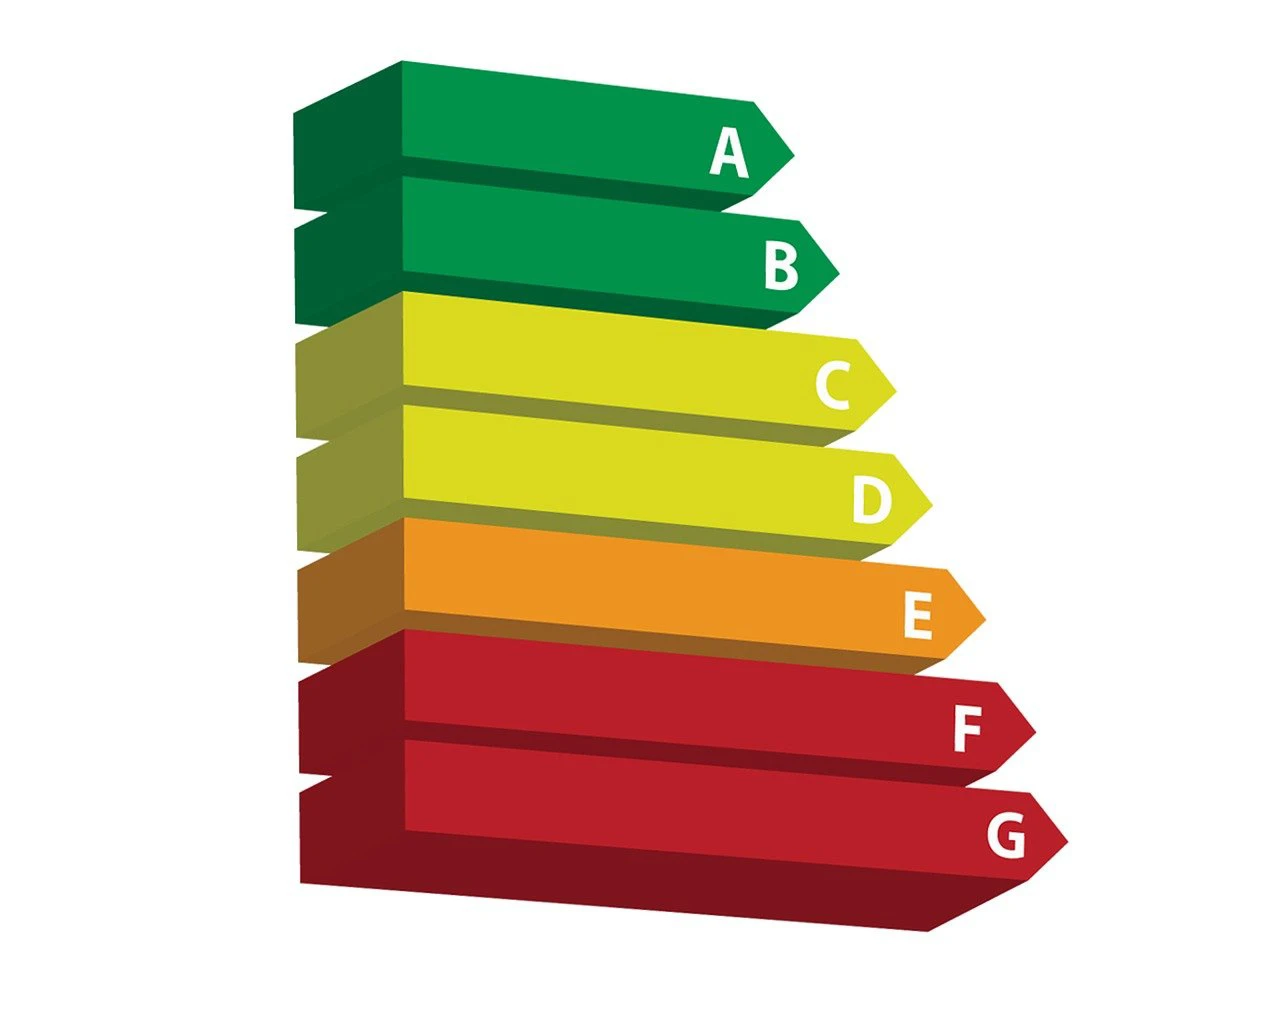 A rating scale going from A to G, with the scale going from green to red.